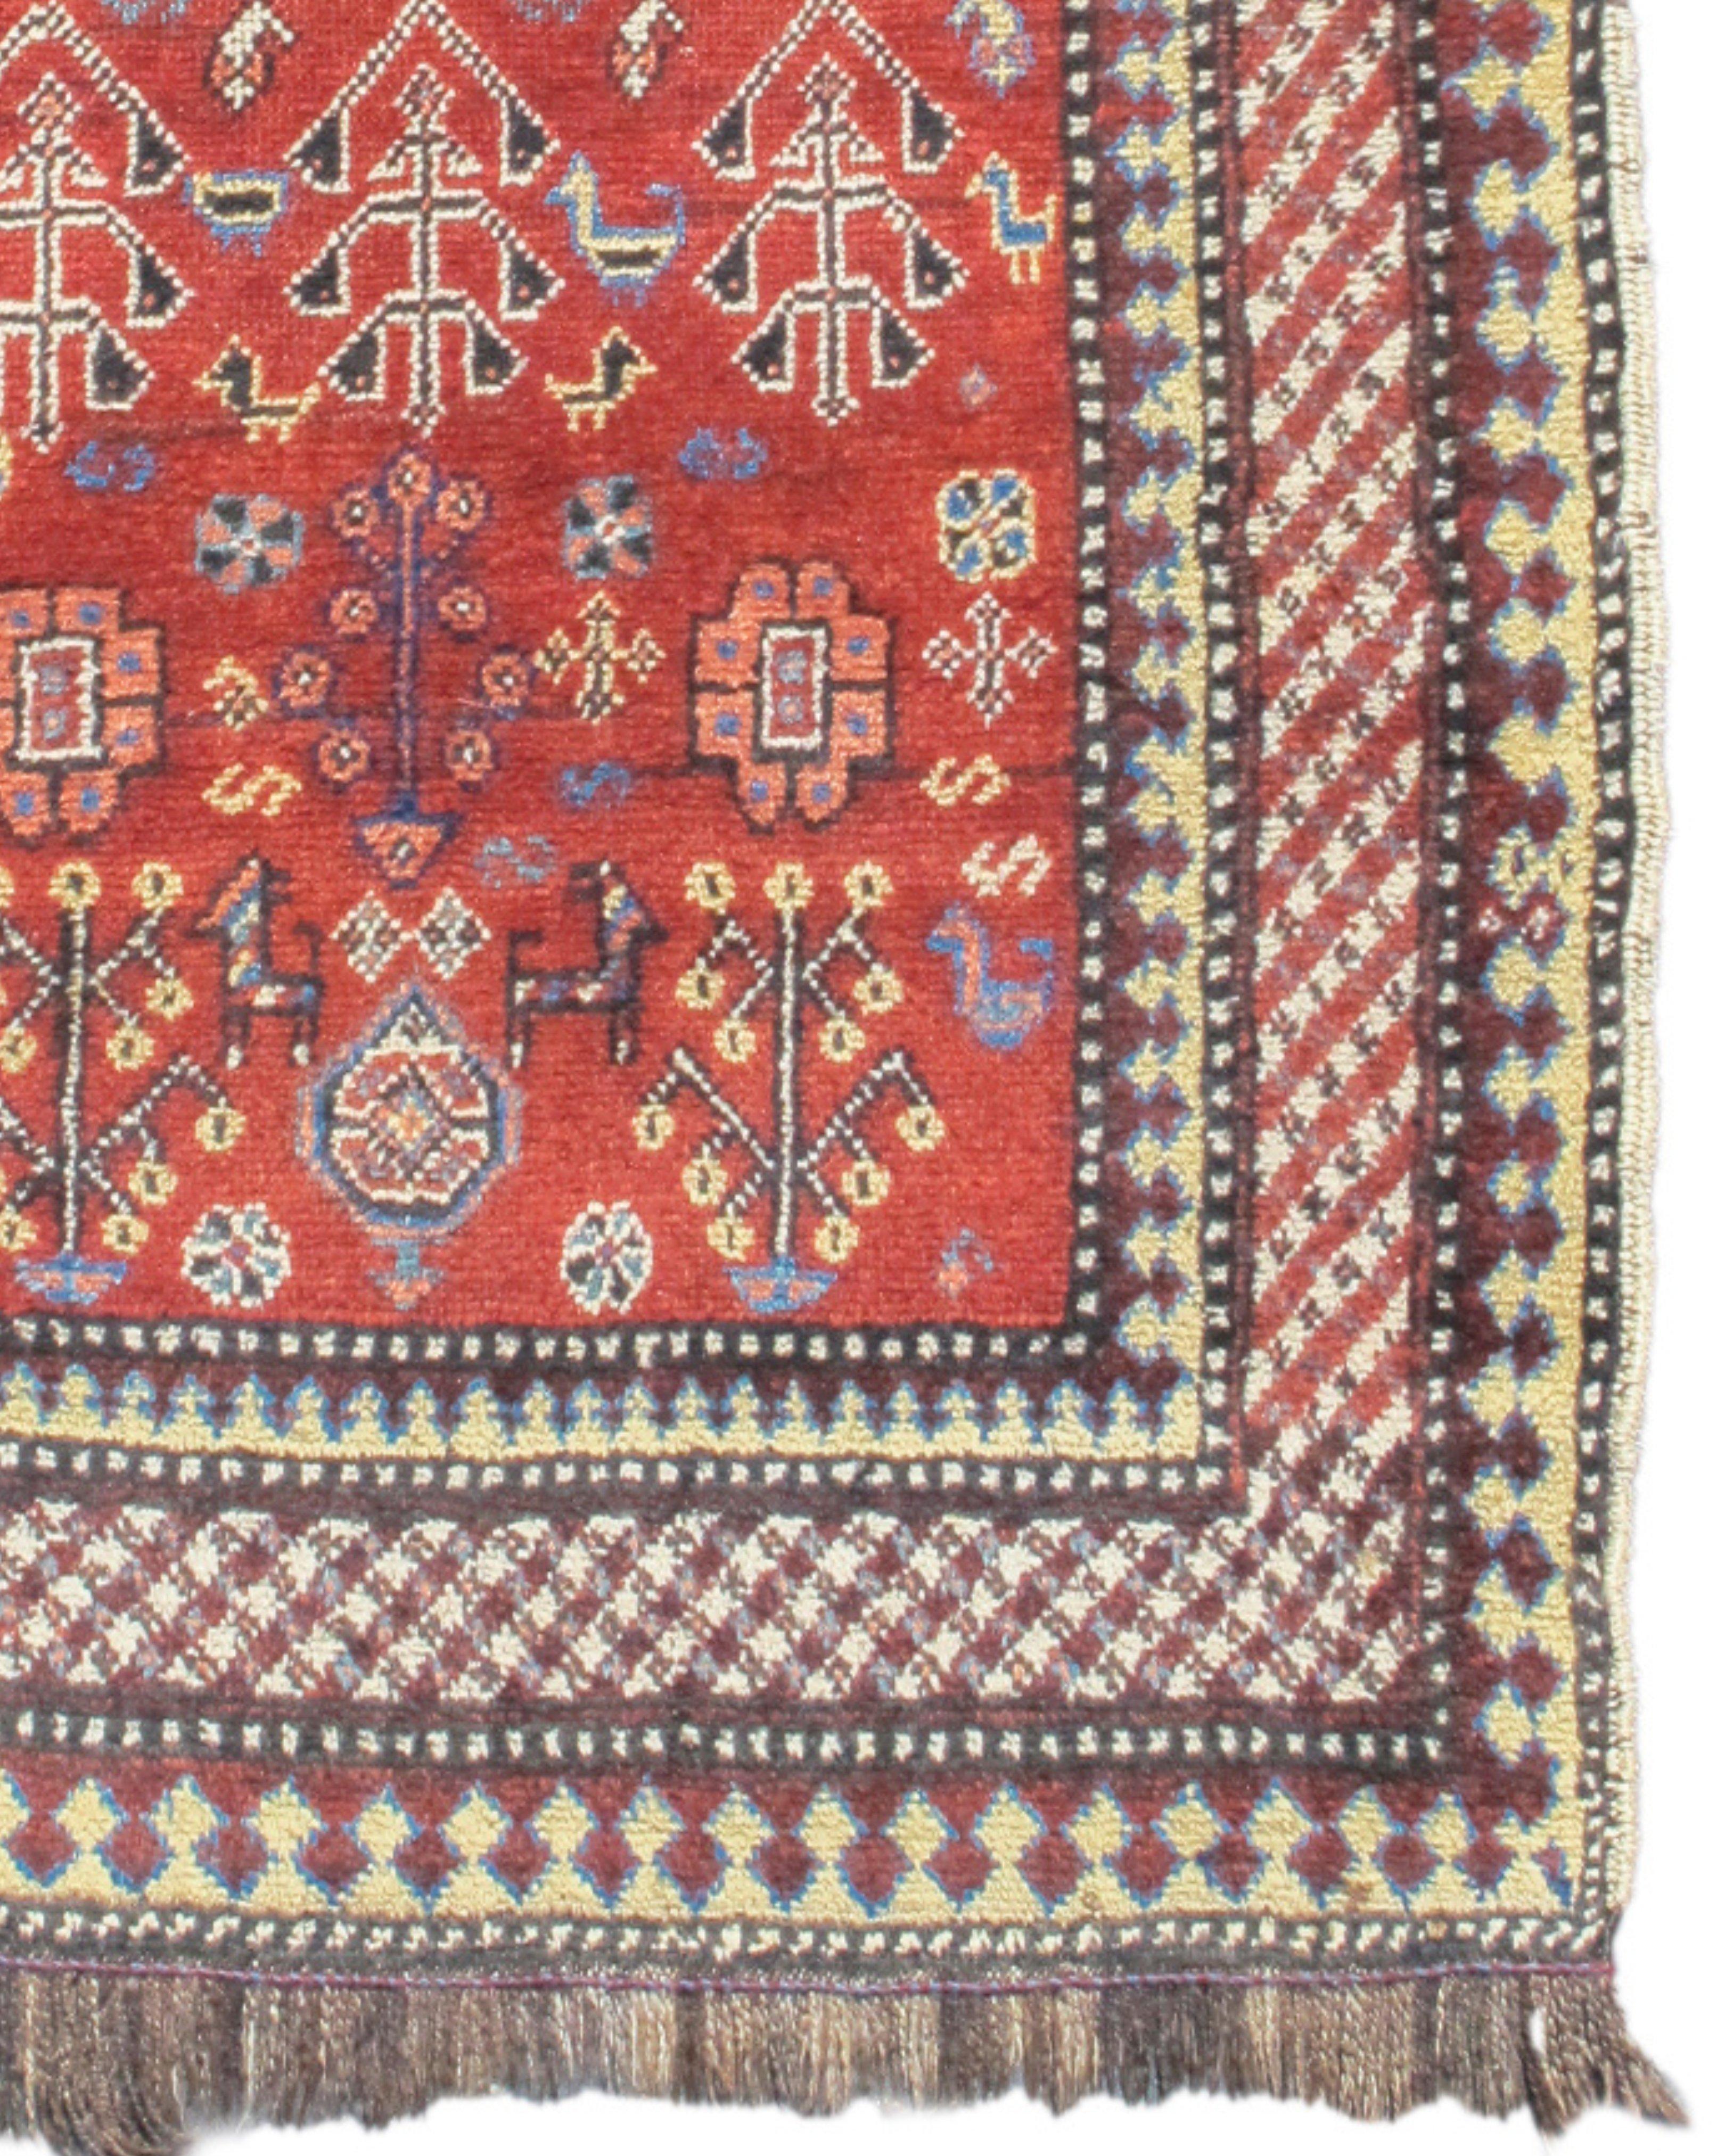 Antique Kurdish Rug, c. 1900 In Excellent Condition For Sale In San Francisco, CA